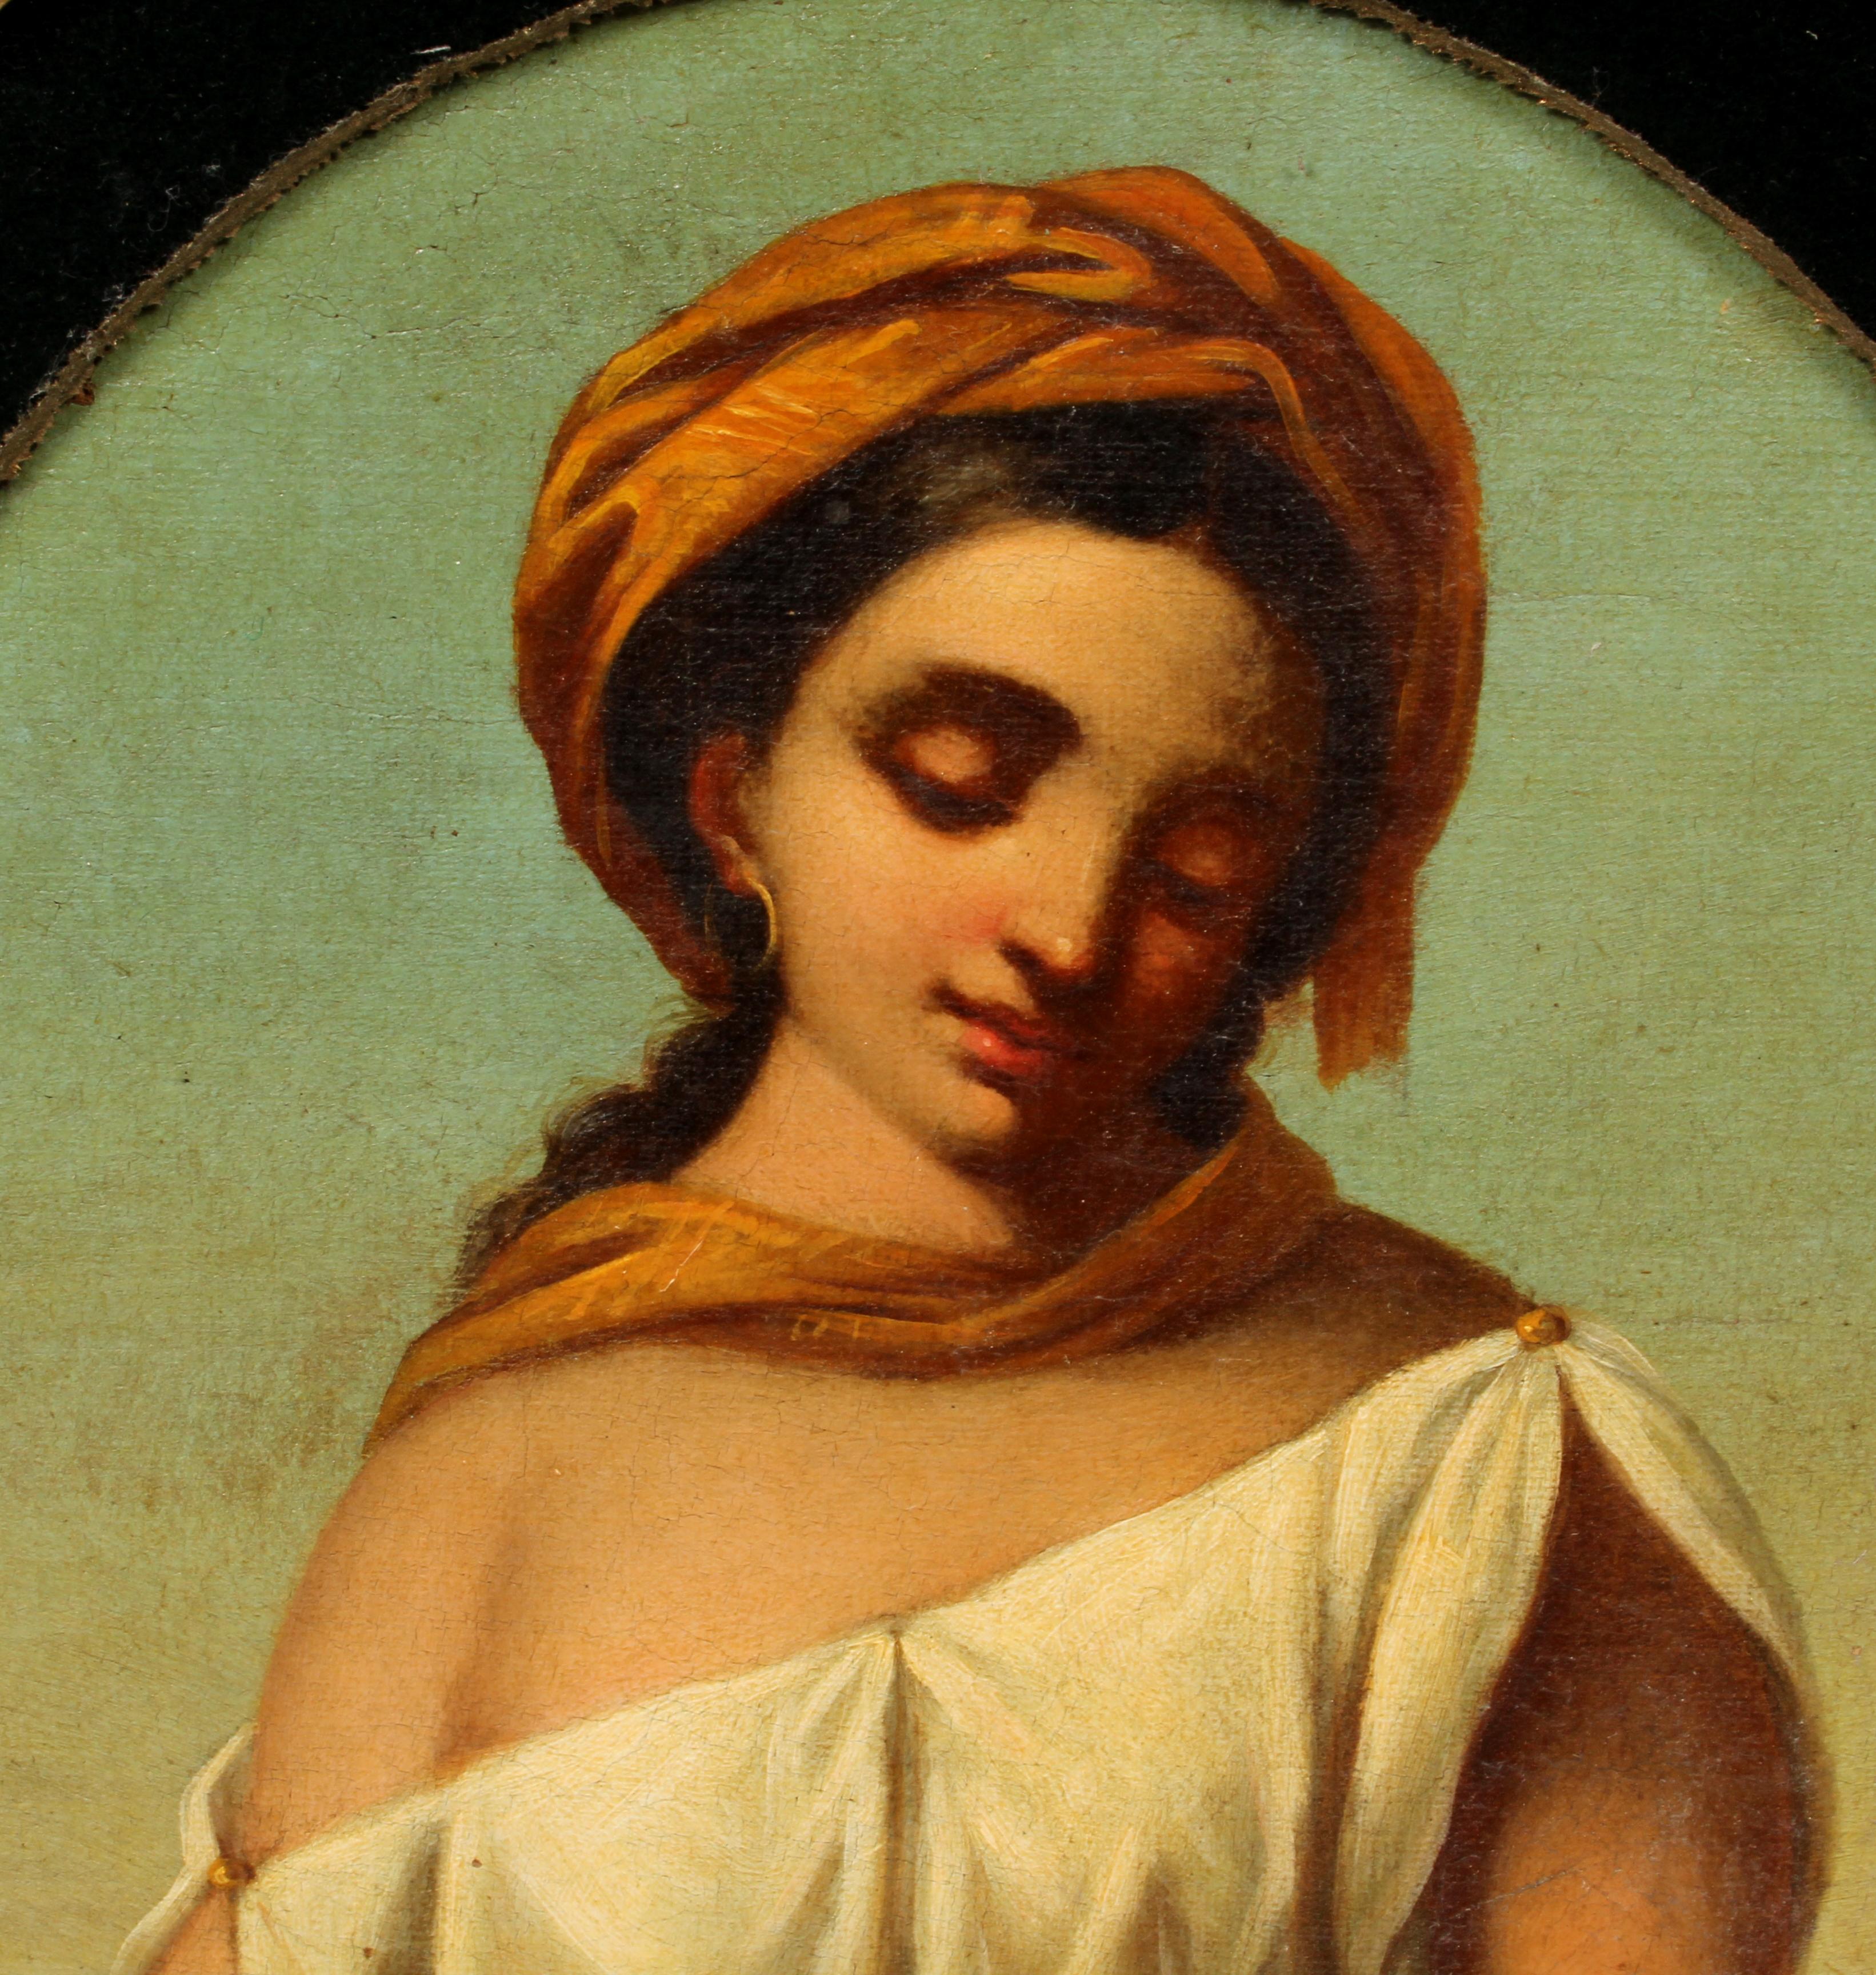 Circular Portrait of a Neapolitan Woman - Painting by Unknown